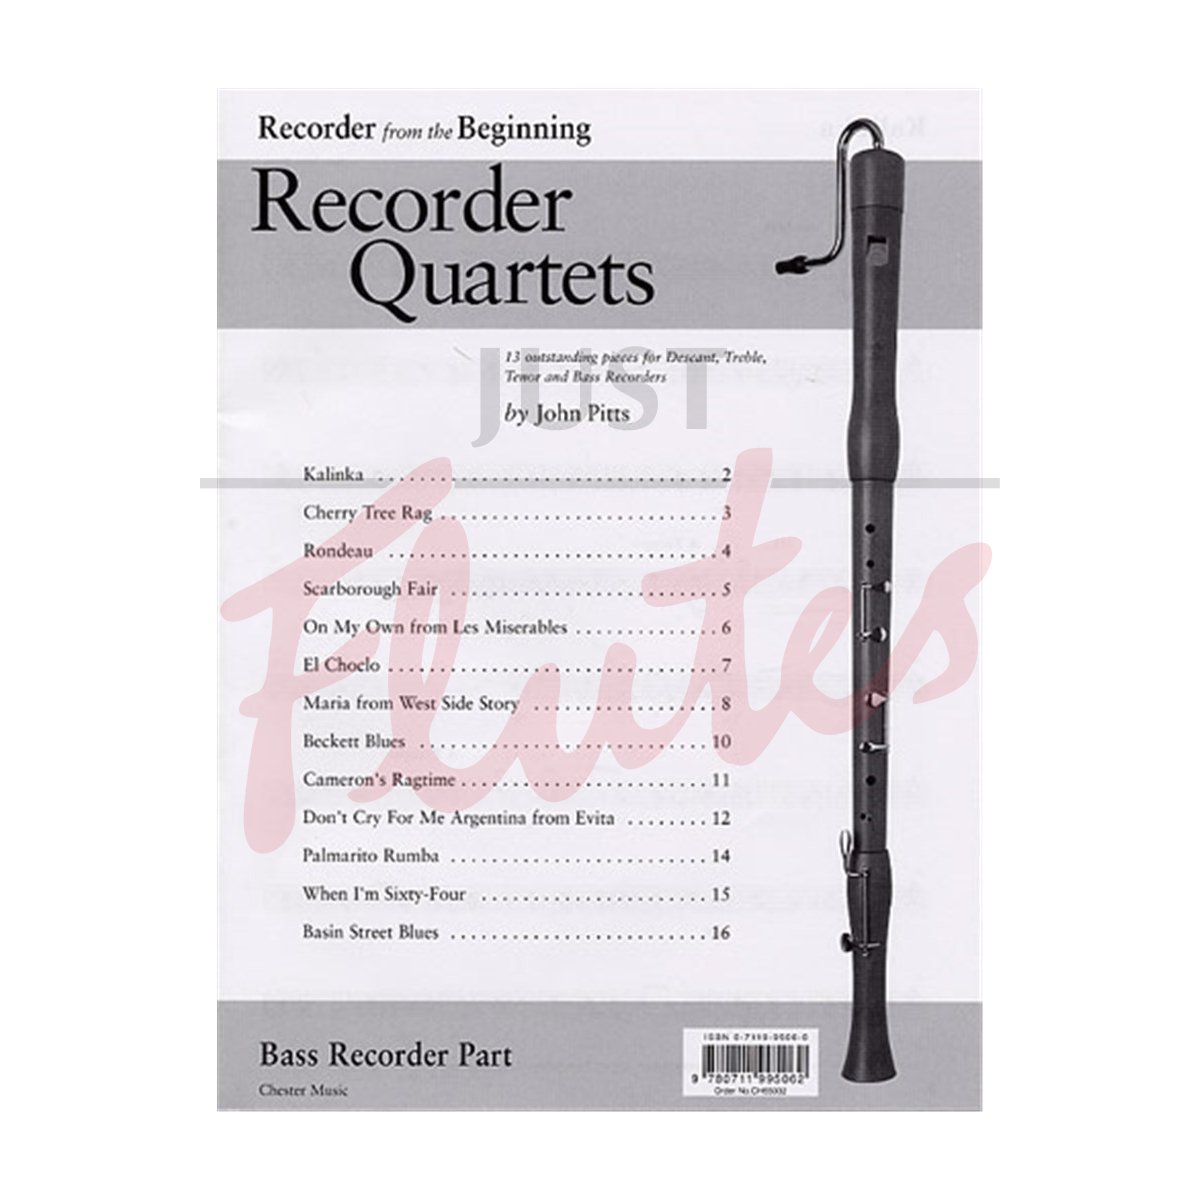 Recorder from the Beginning: Recorder Quartets, Bass Recorder Part